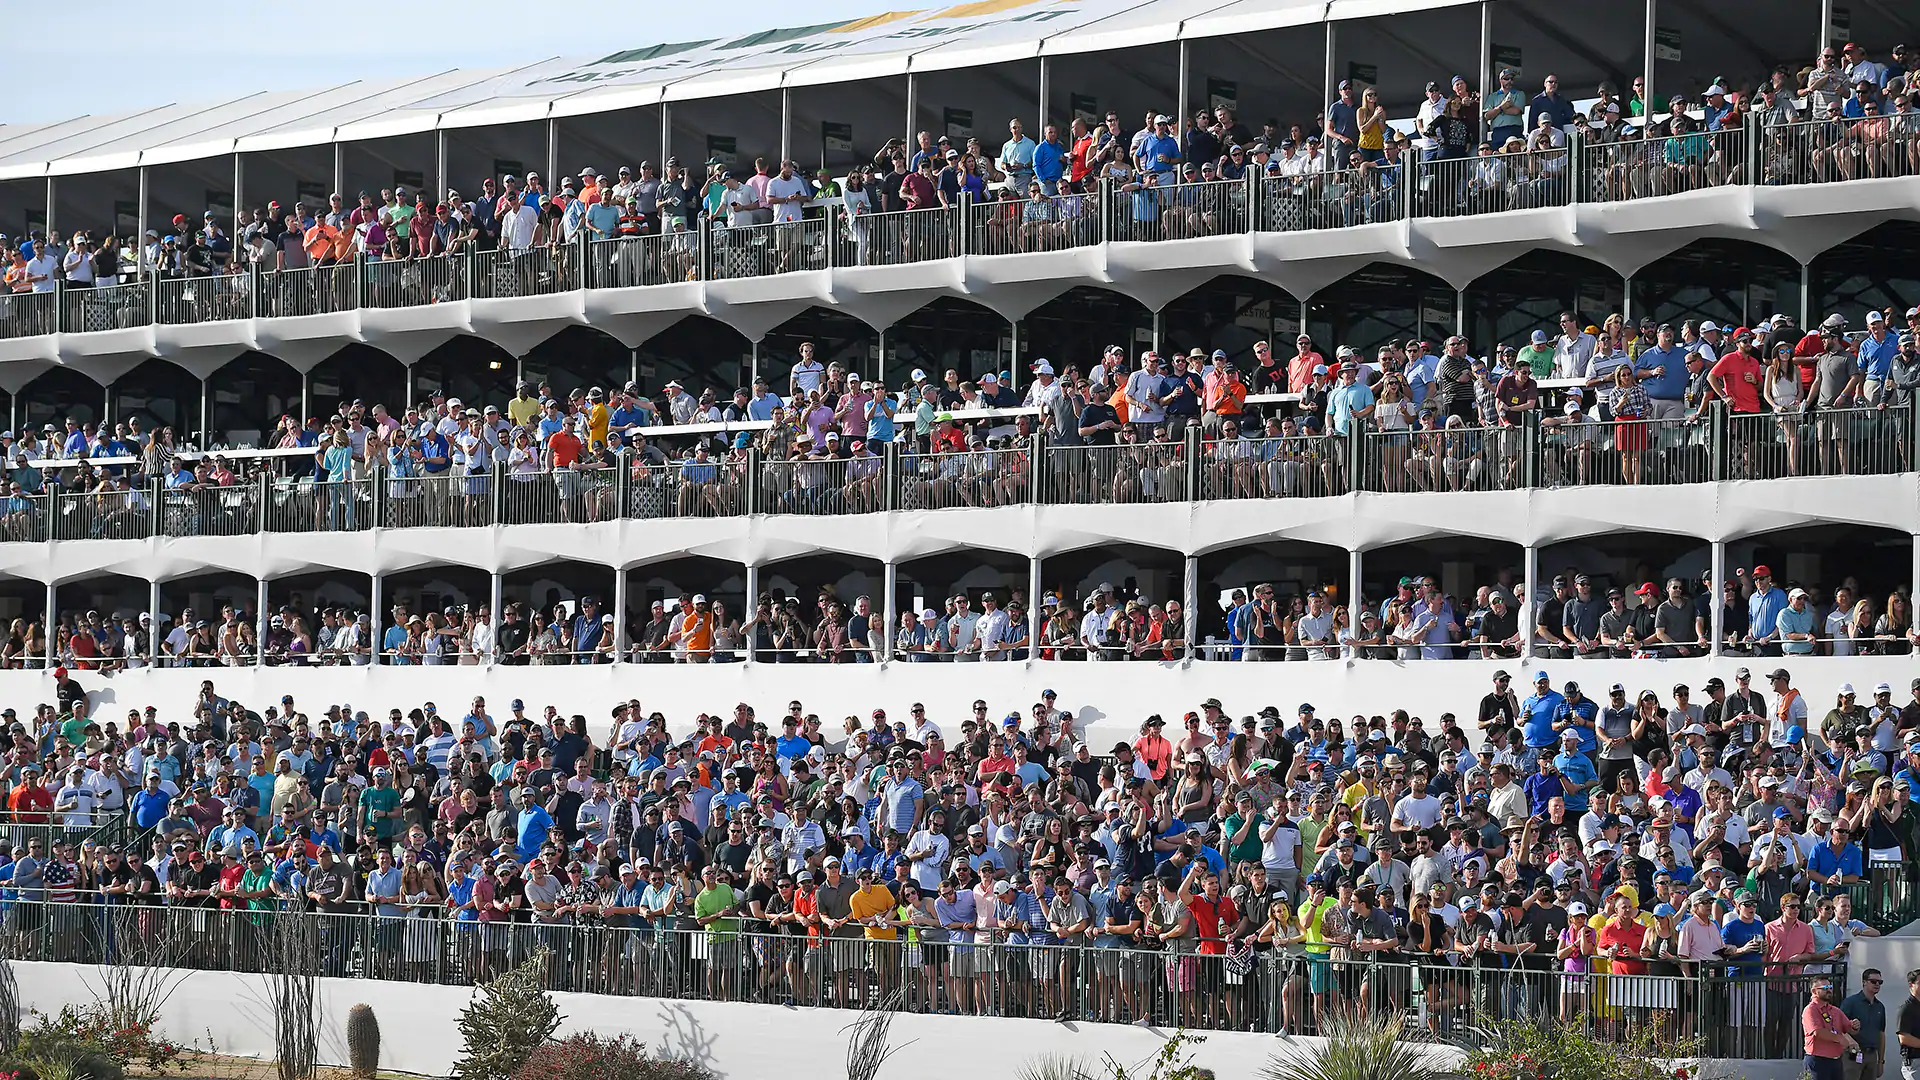 WMPO sets new attendance record with 216,818 fans